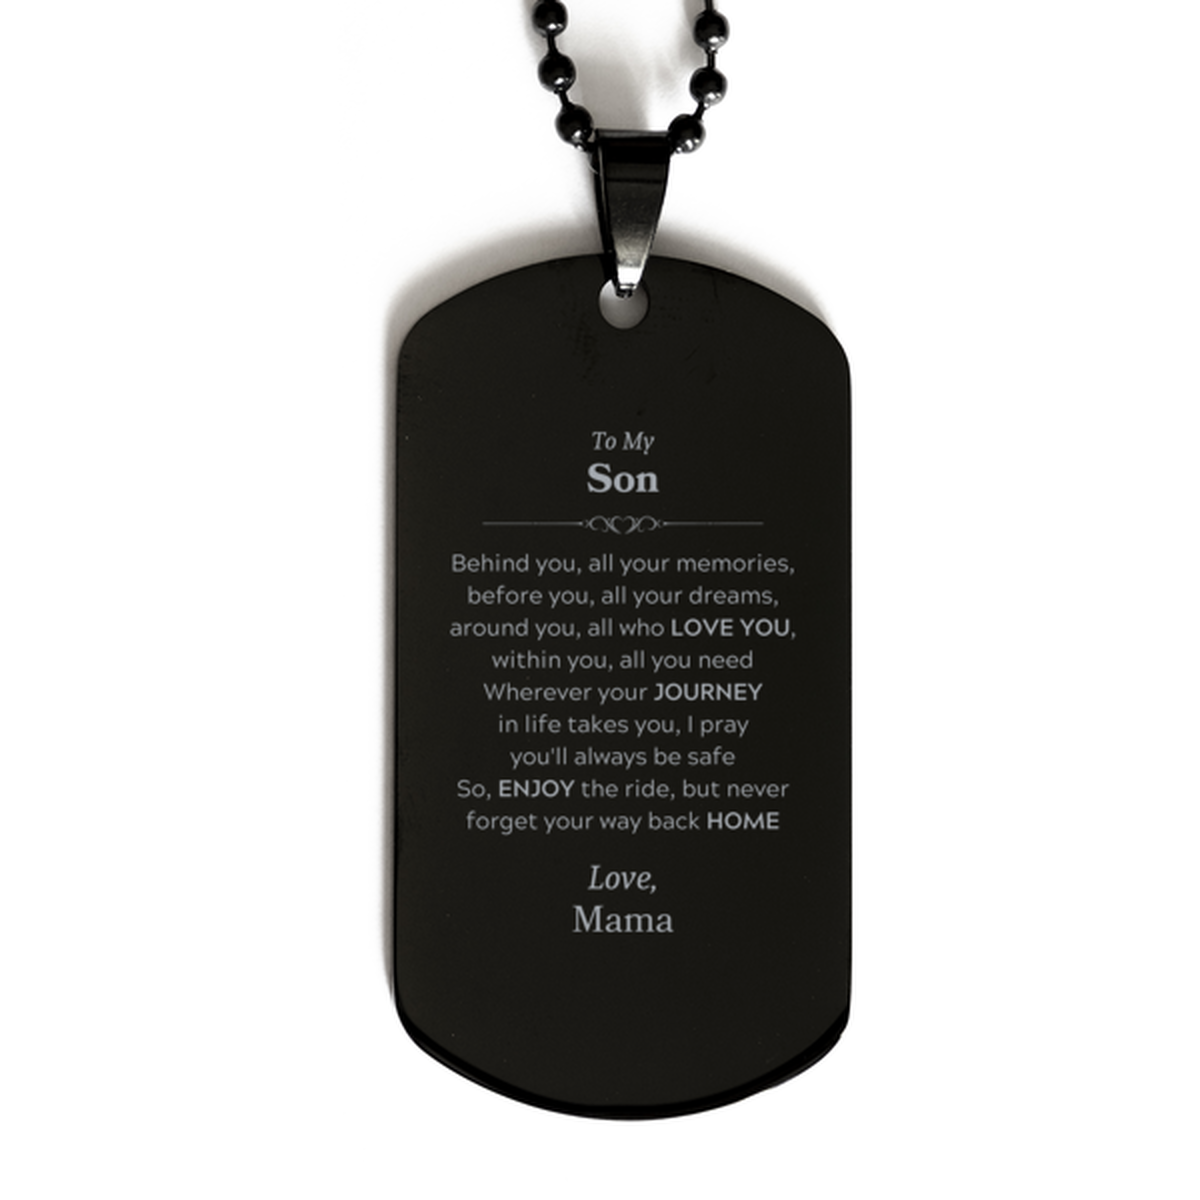 To My Son Graduation Gifts from Mama, Son Black Dog Tag Christmas Birthday Gifts for Son Behind you, all your memories, before you, all your dreams. Love, Mama